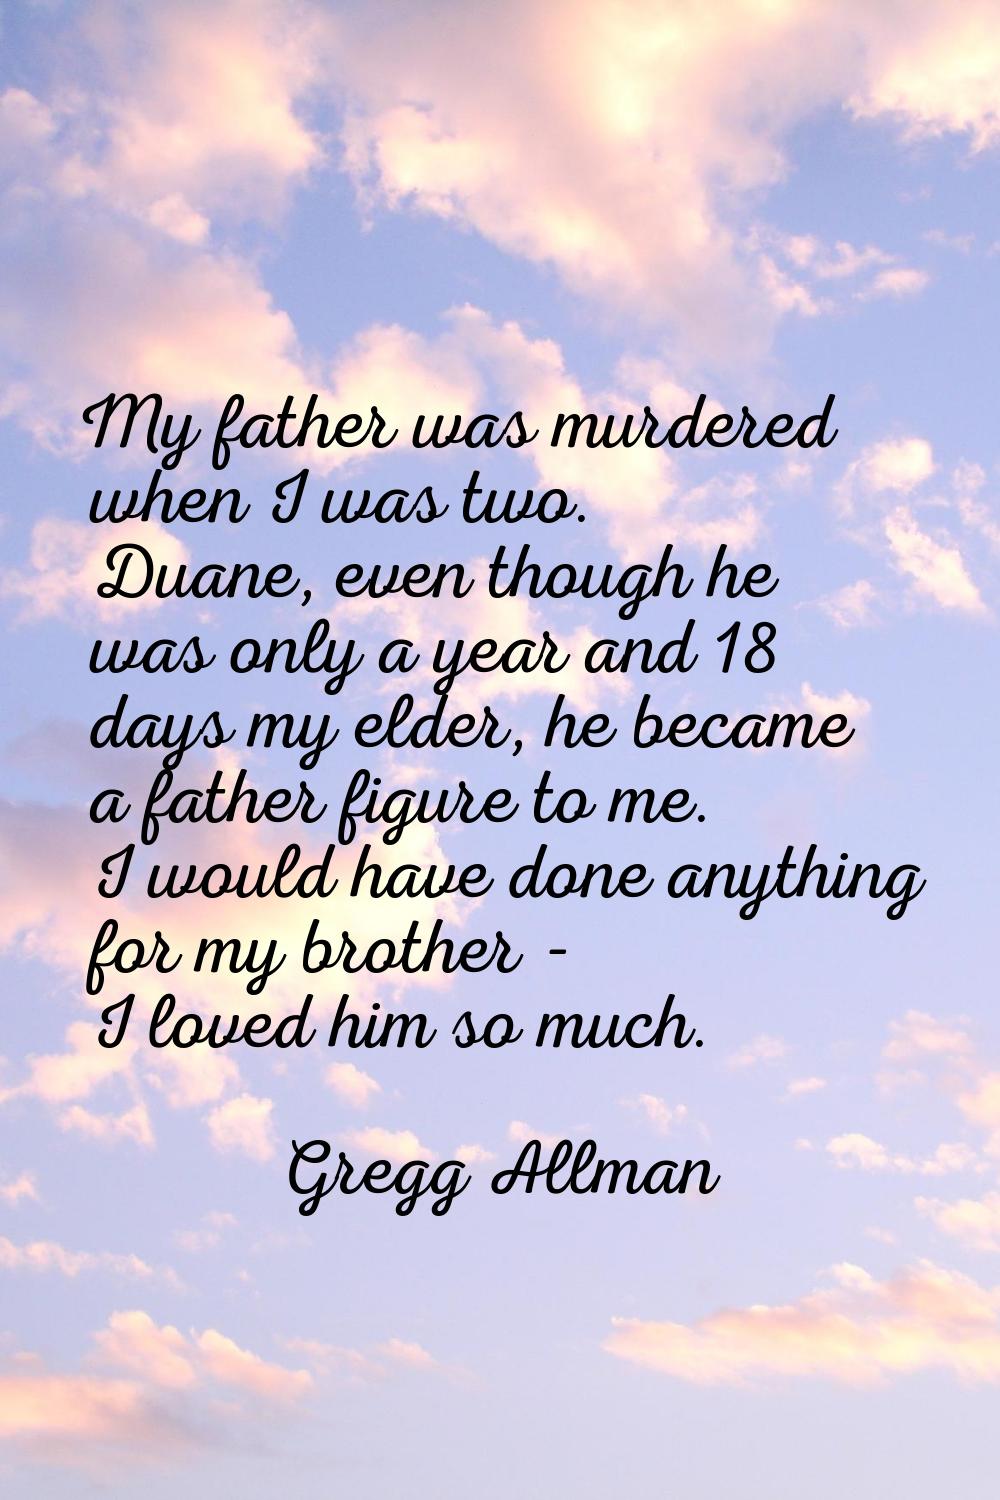 My father was murdered when I was two. Duane, even though he was only a year and 18 days my elder, 